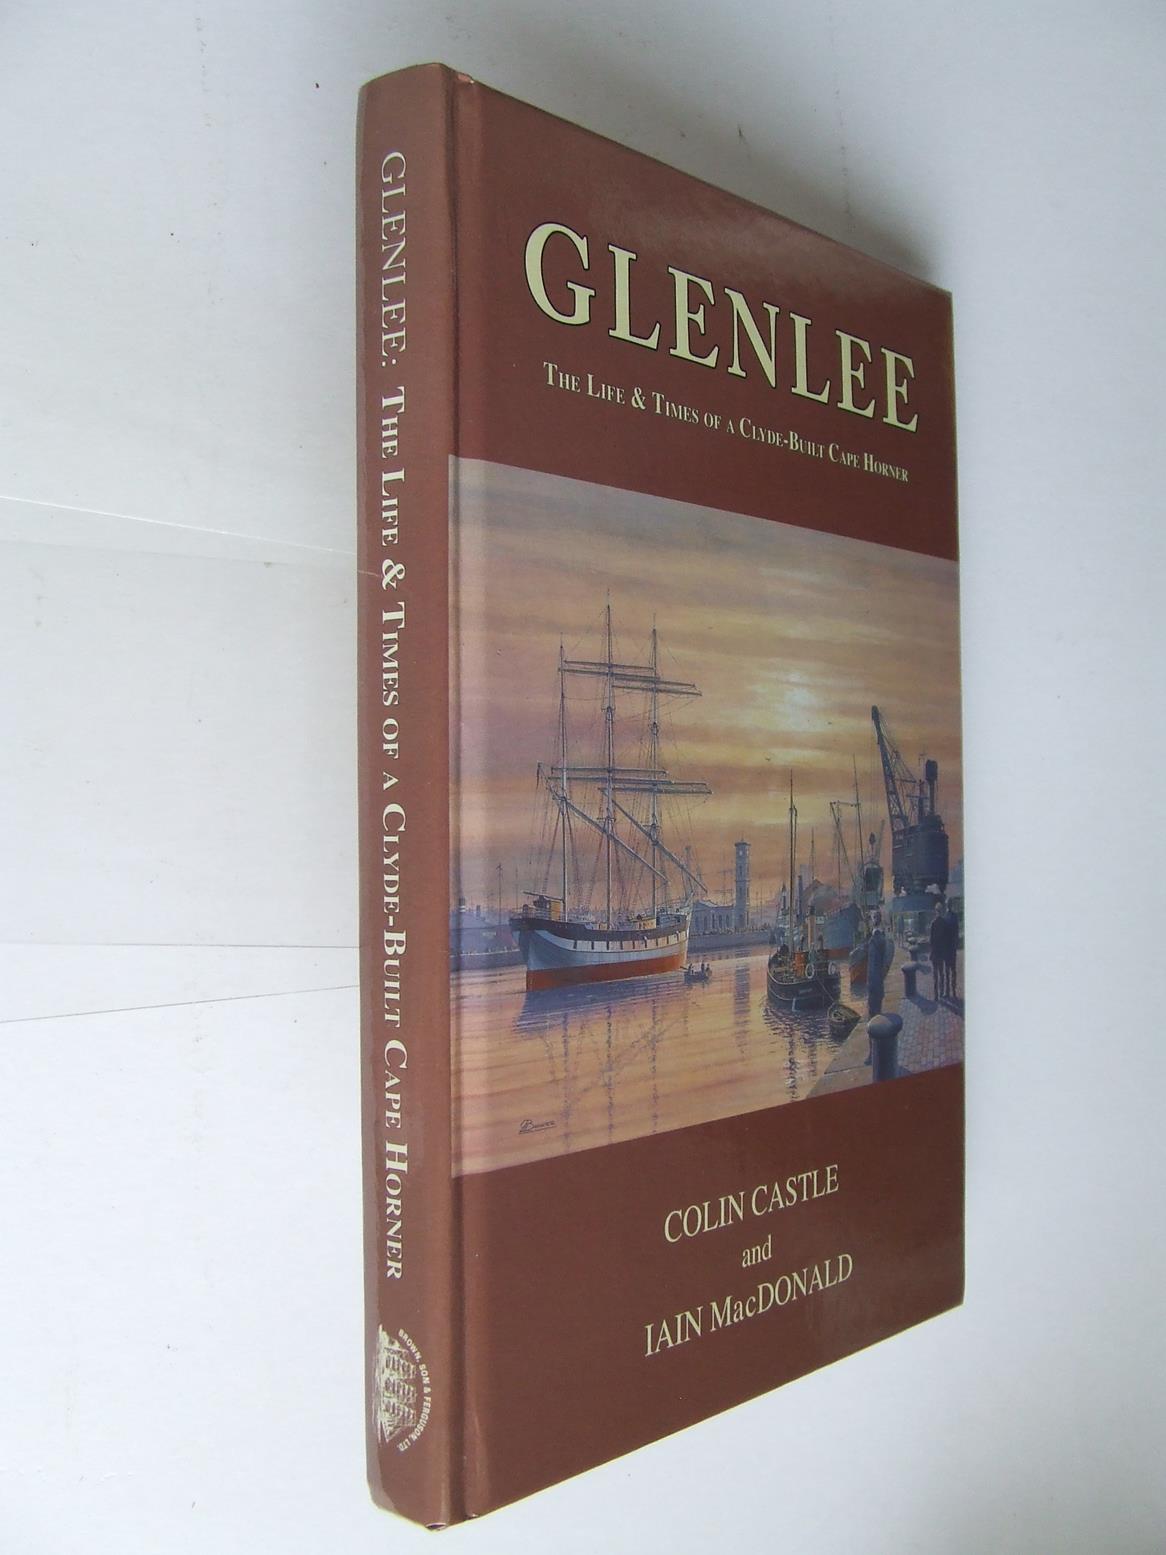 Glenlee, the life and times of a Clyde-built Cape Horner